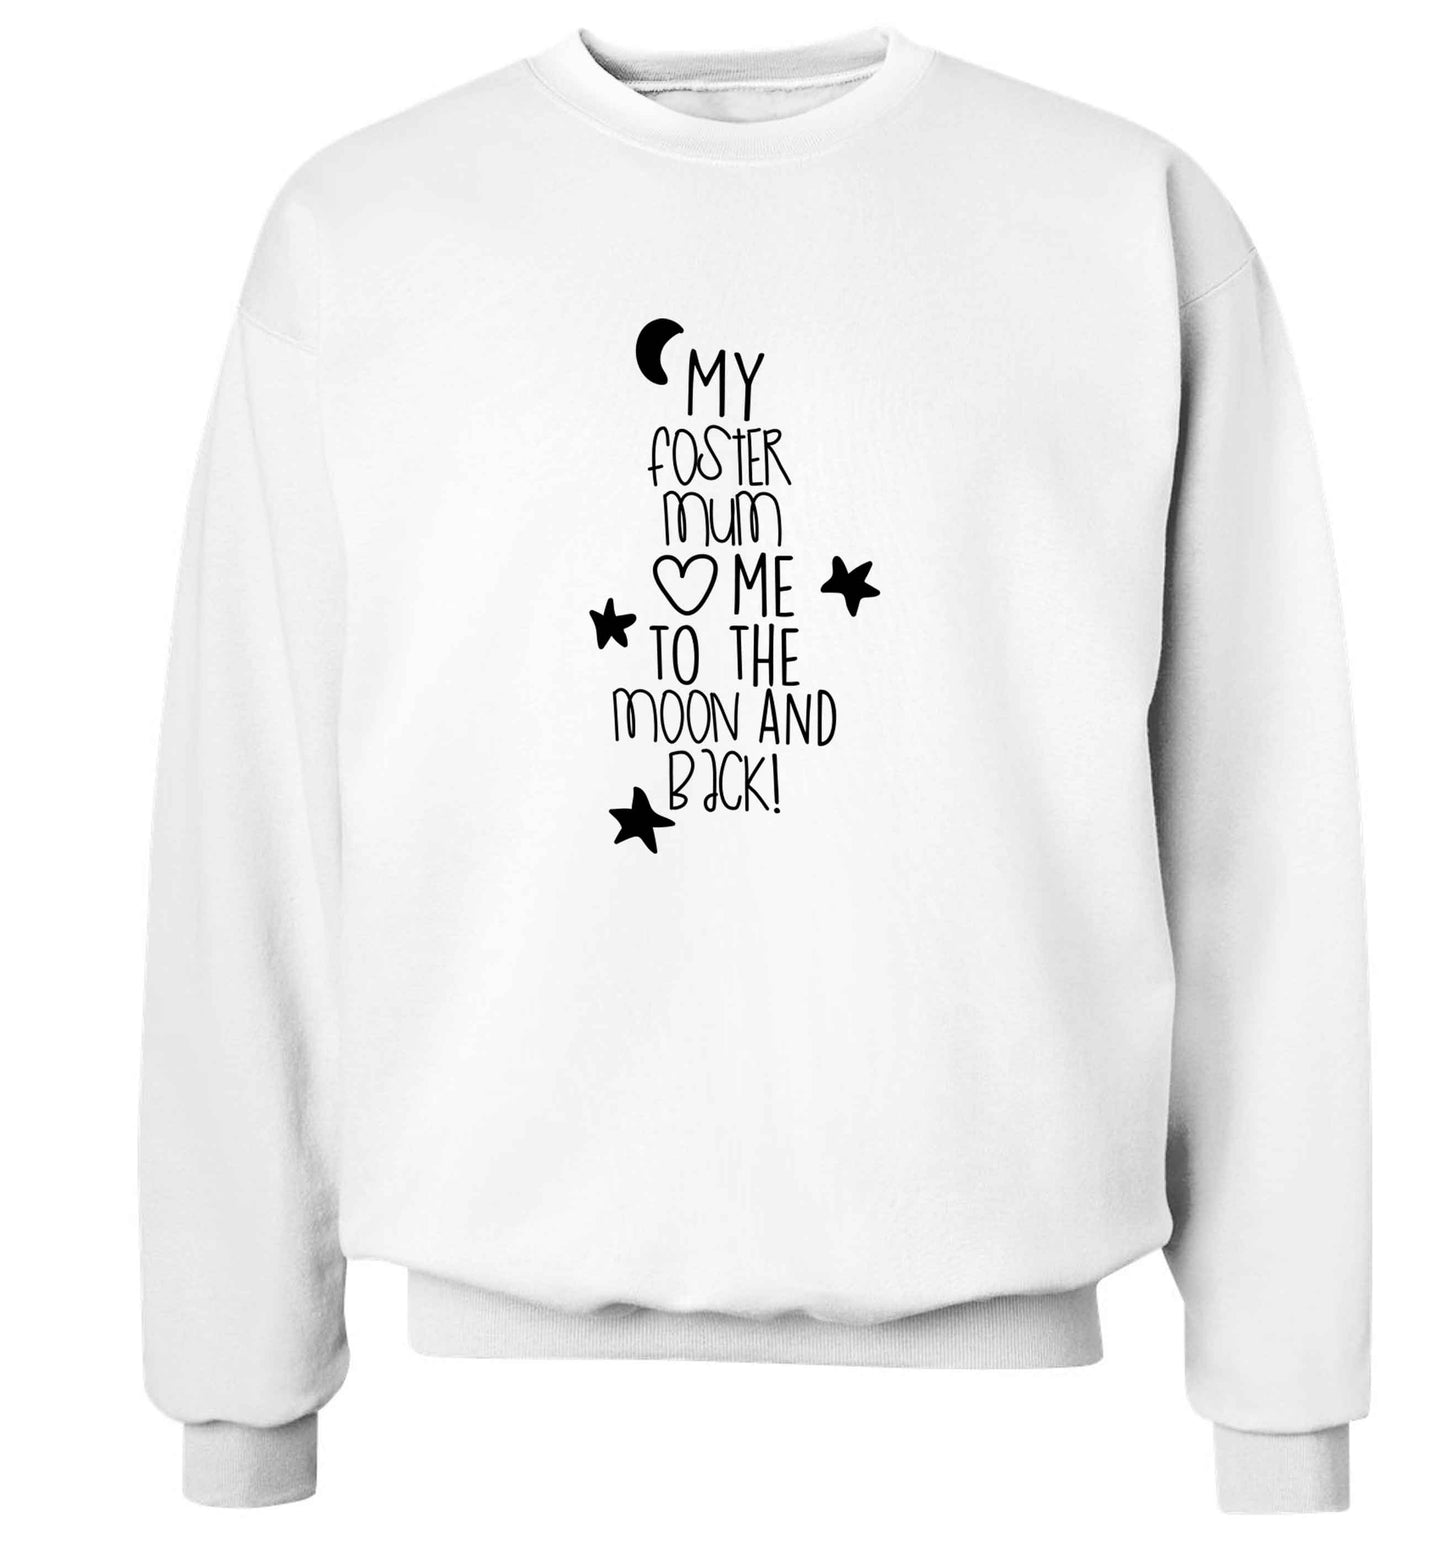 My foster mum loves me to the moon and back adult's unisex white sweater 2XL